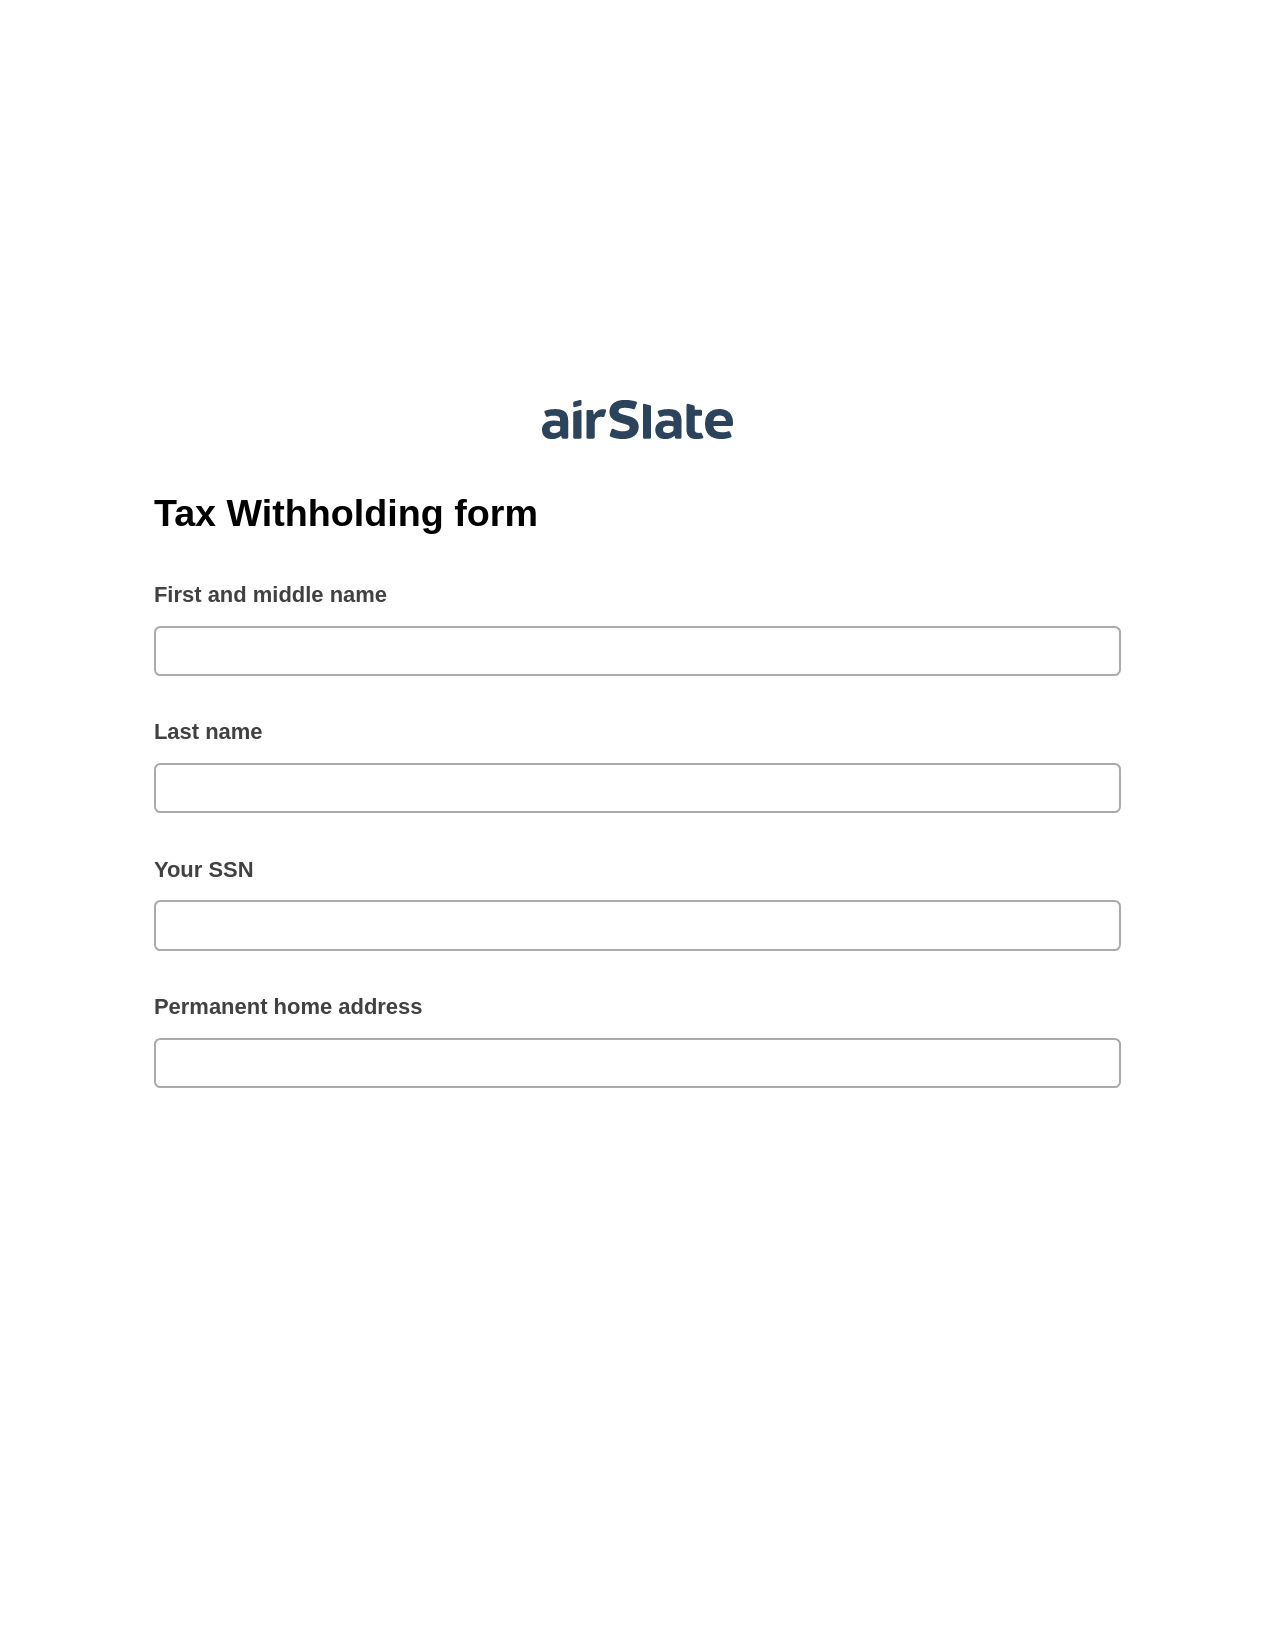 Multirole Tax Withholding form Pre-fill from CSV File Bot, Lock the Slate Bot, Export to Excel 365 Bot